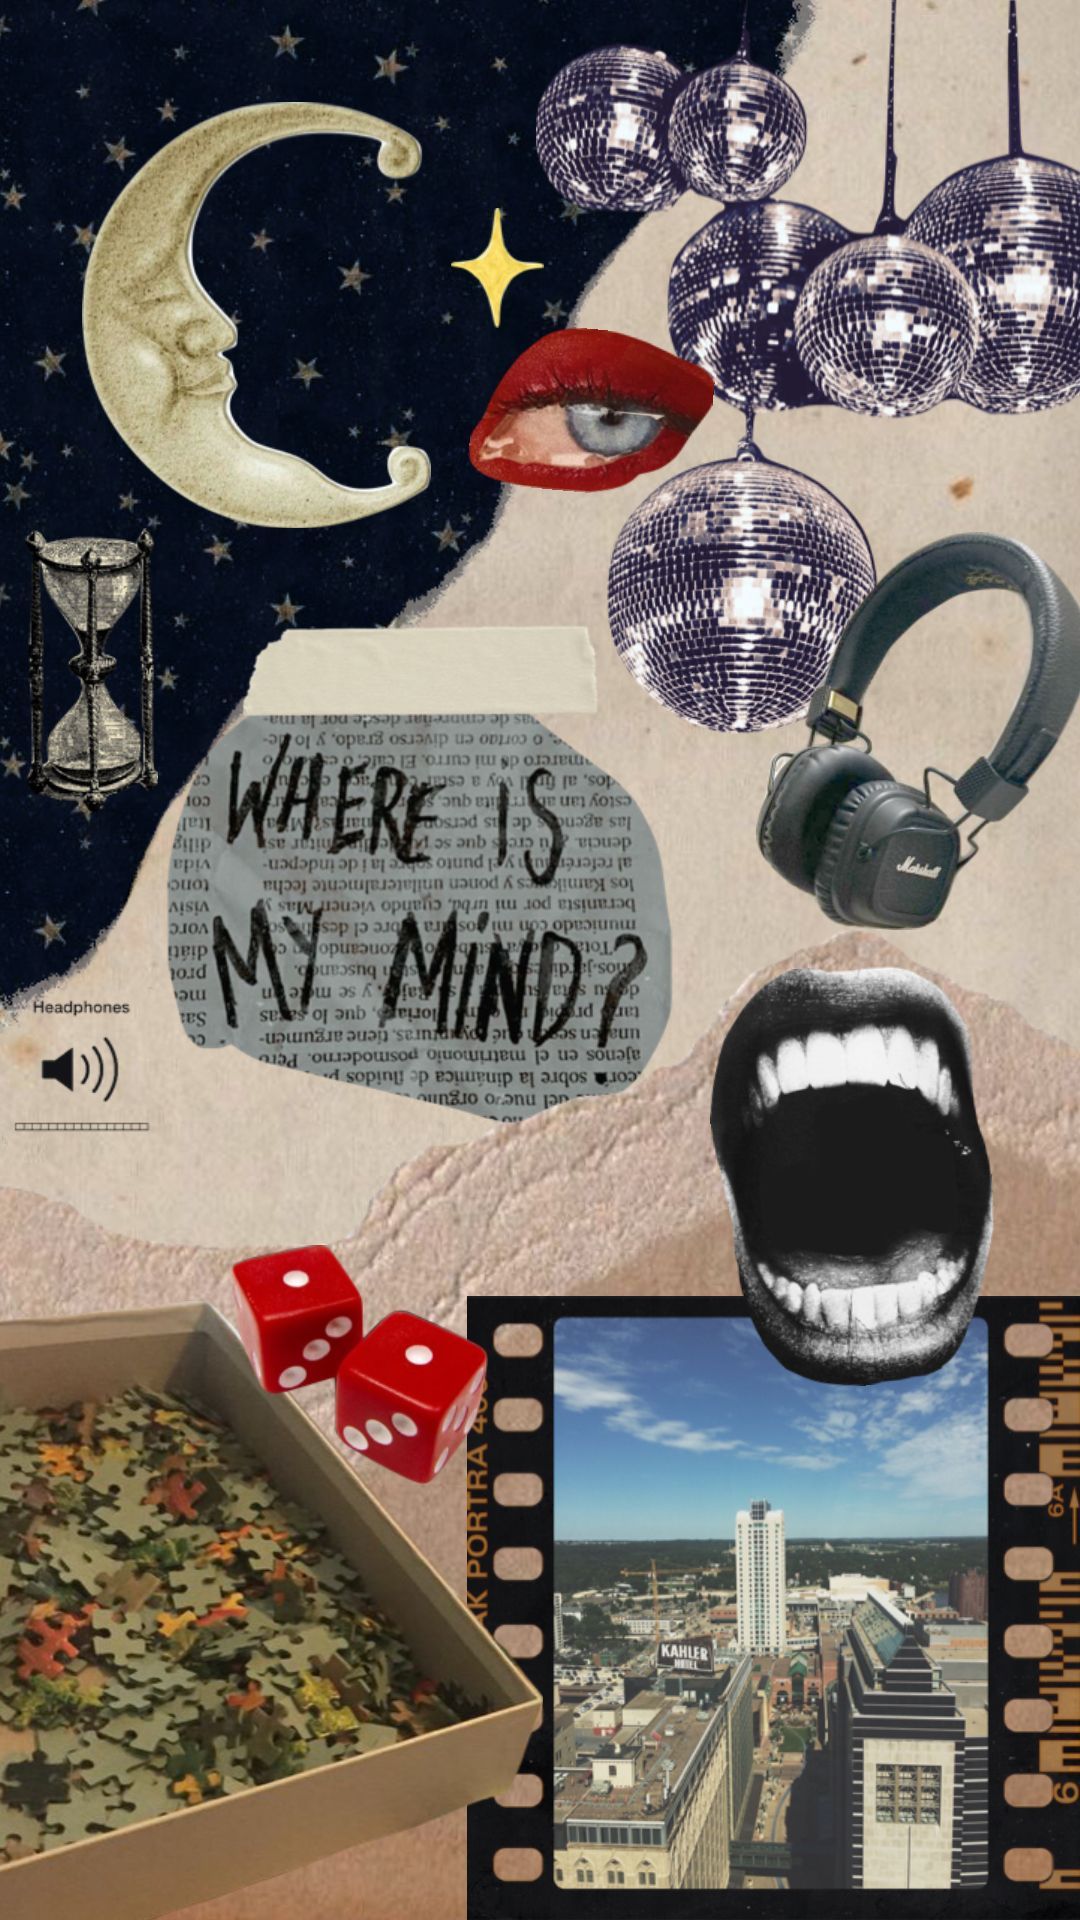 A collage of images including a pair of headphones, dice, a moon, a city, and the words 